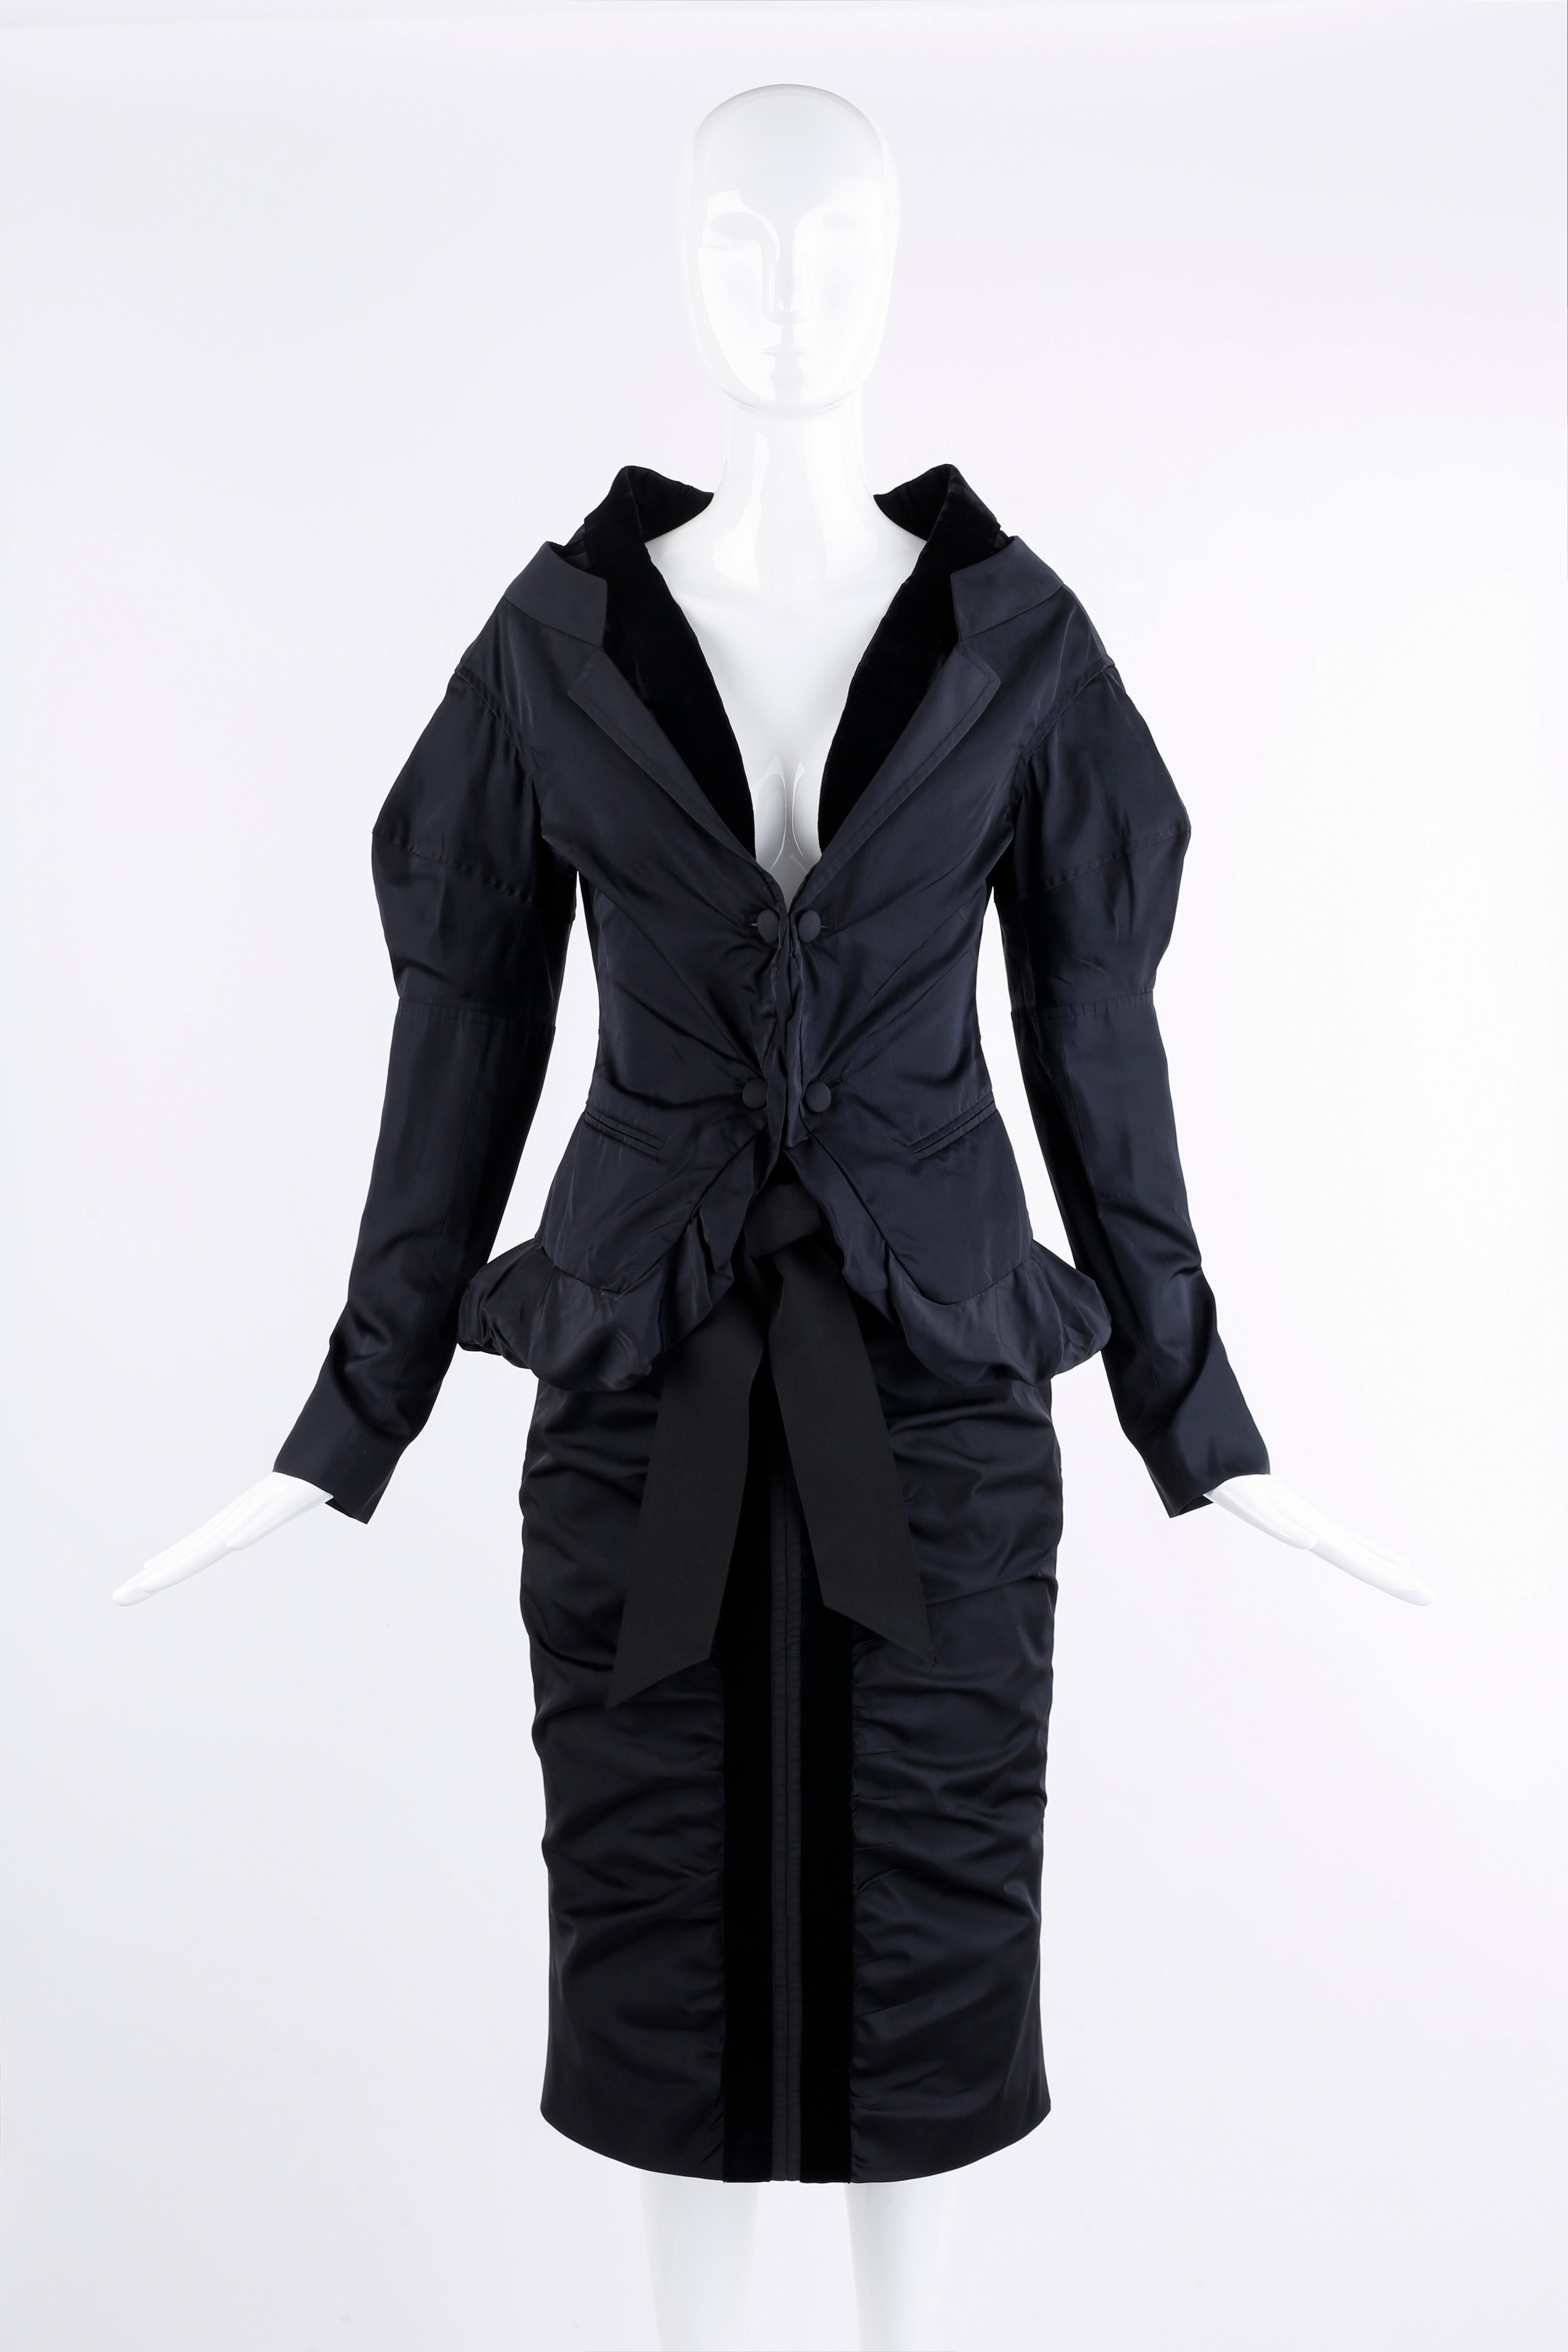 Yves Saint Laurent by Tom Ford F/W 2002 Black Silk Evening Jacket & Skirt Suit In Good Condition For Sale In Chicago, IL